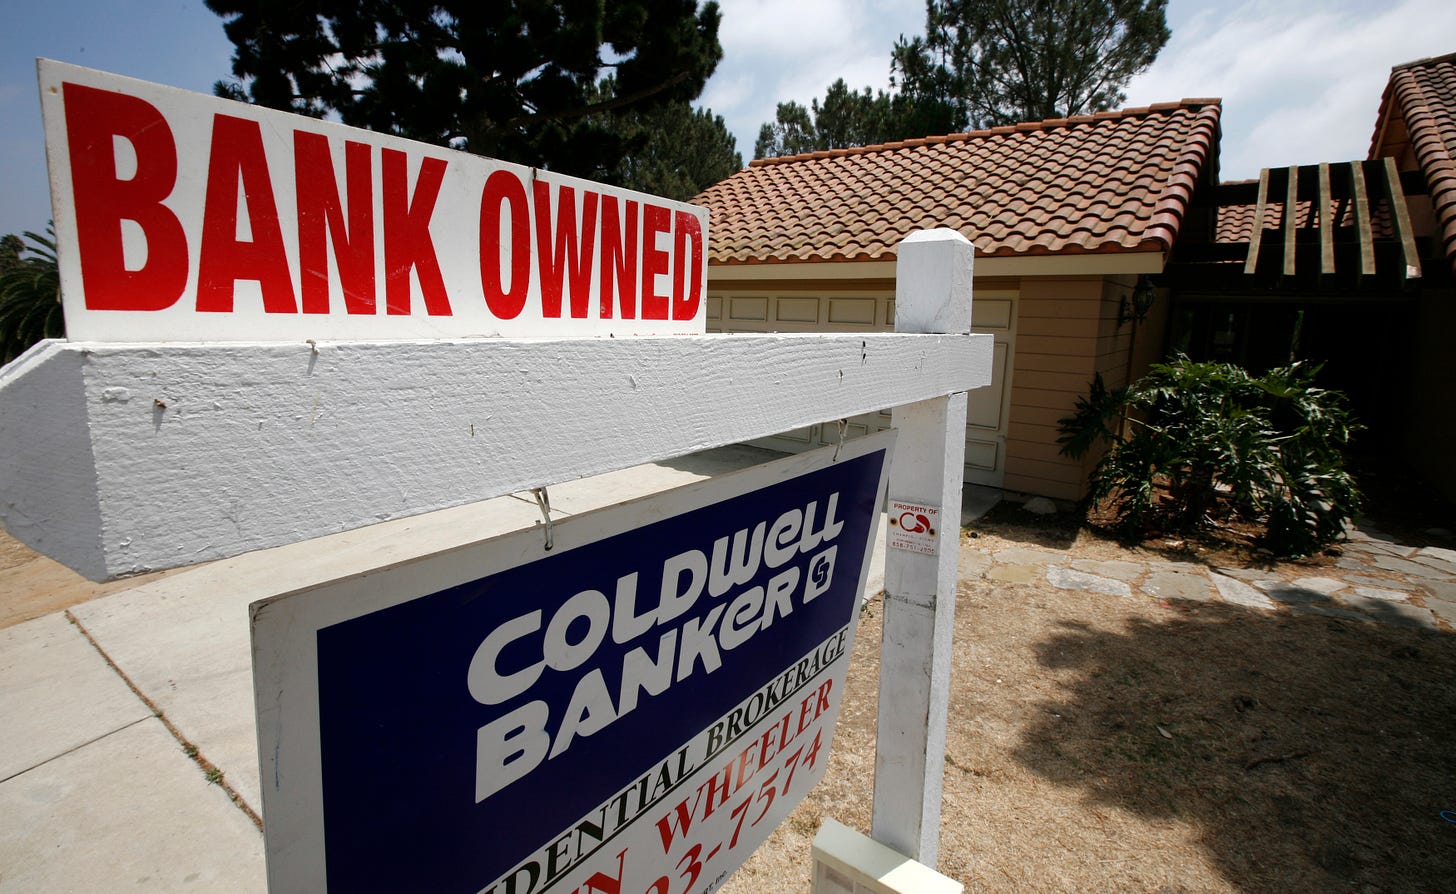 Banks thrive, while homeowners still suffer